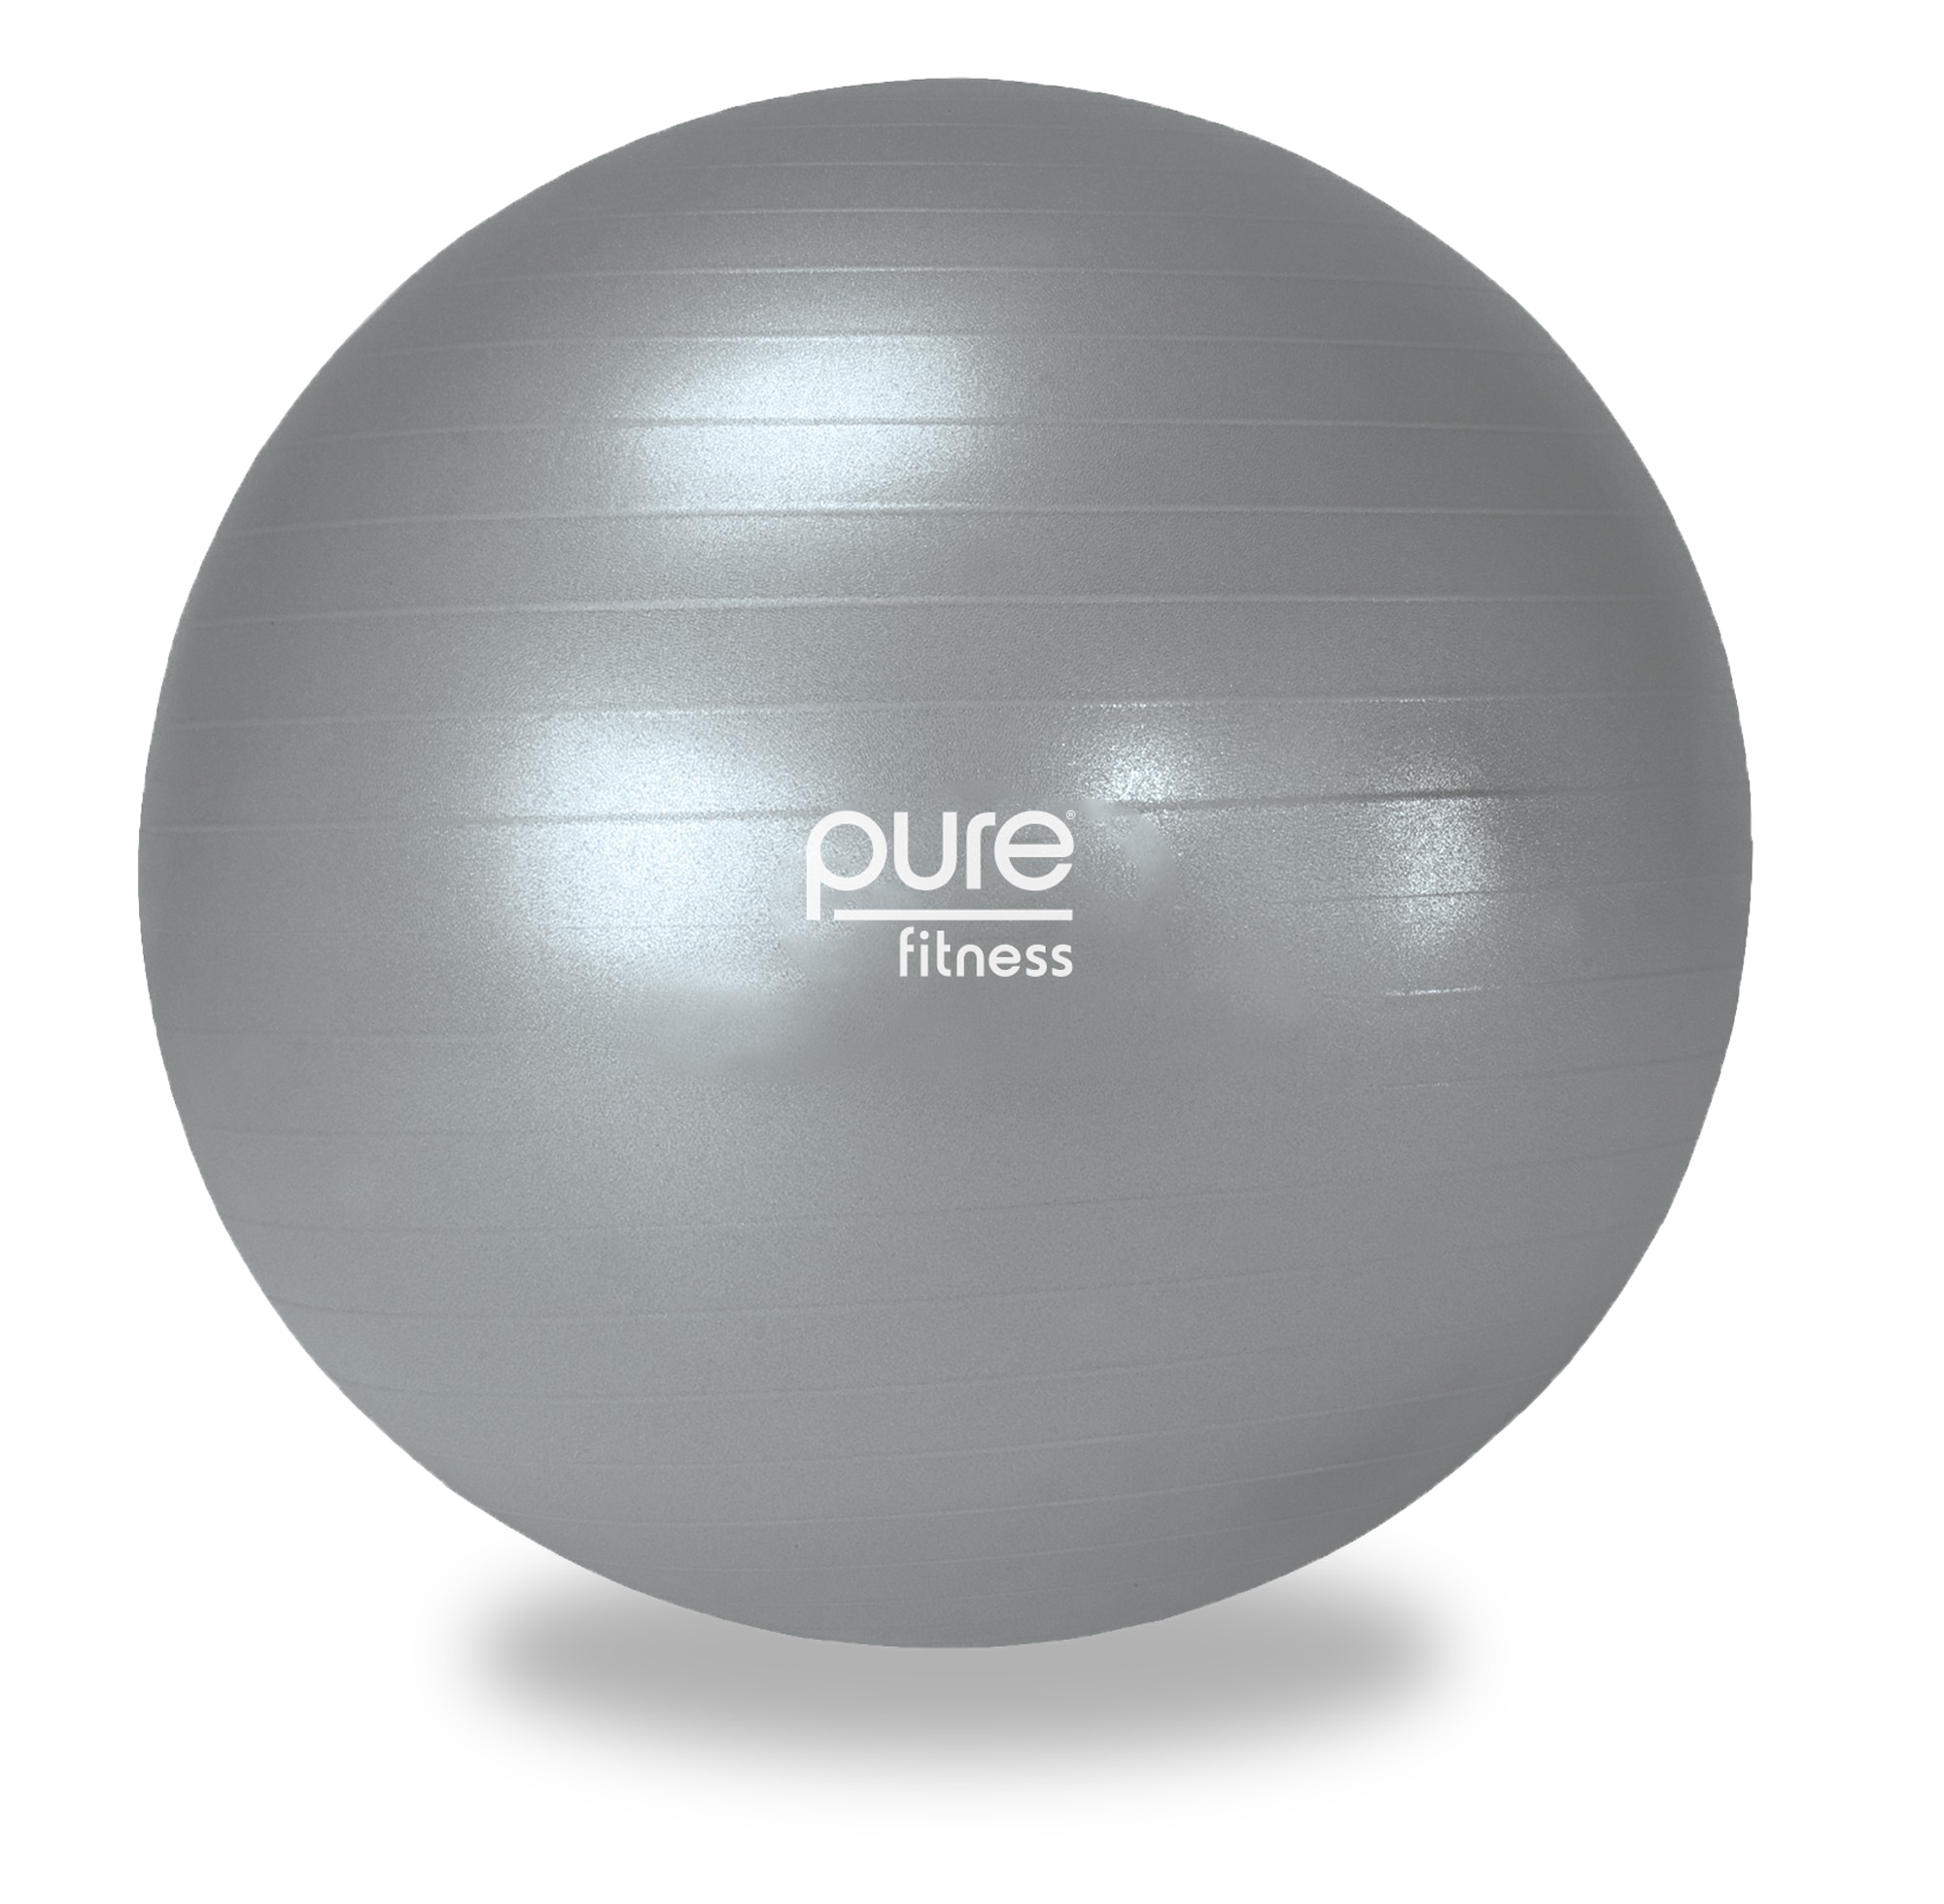 Pure Fitness 75-cm Stability Exercise in the Exercise Balls department at Lowes.com